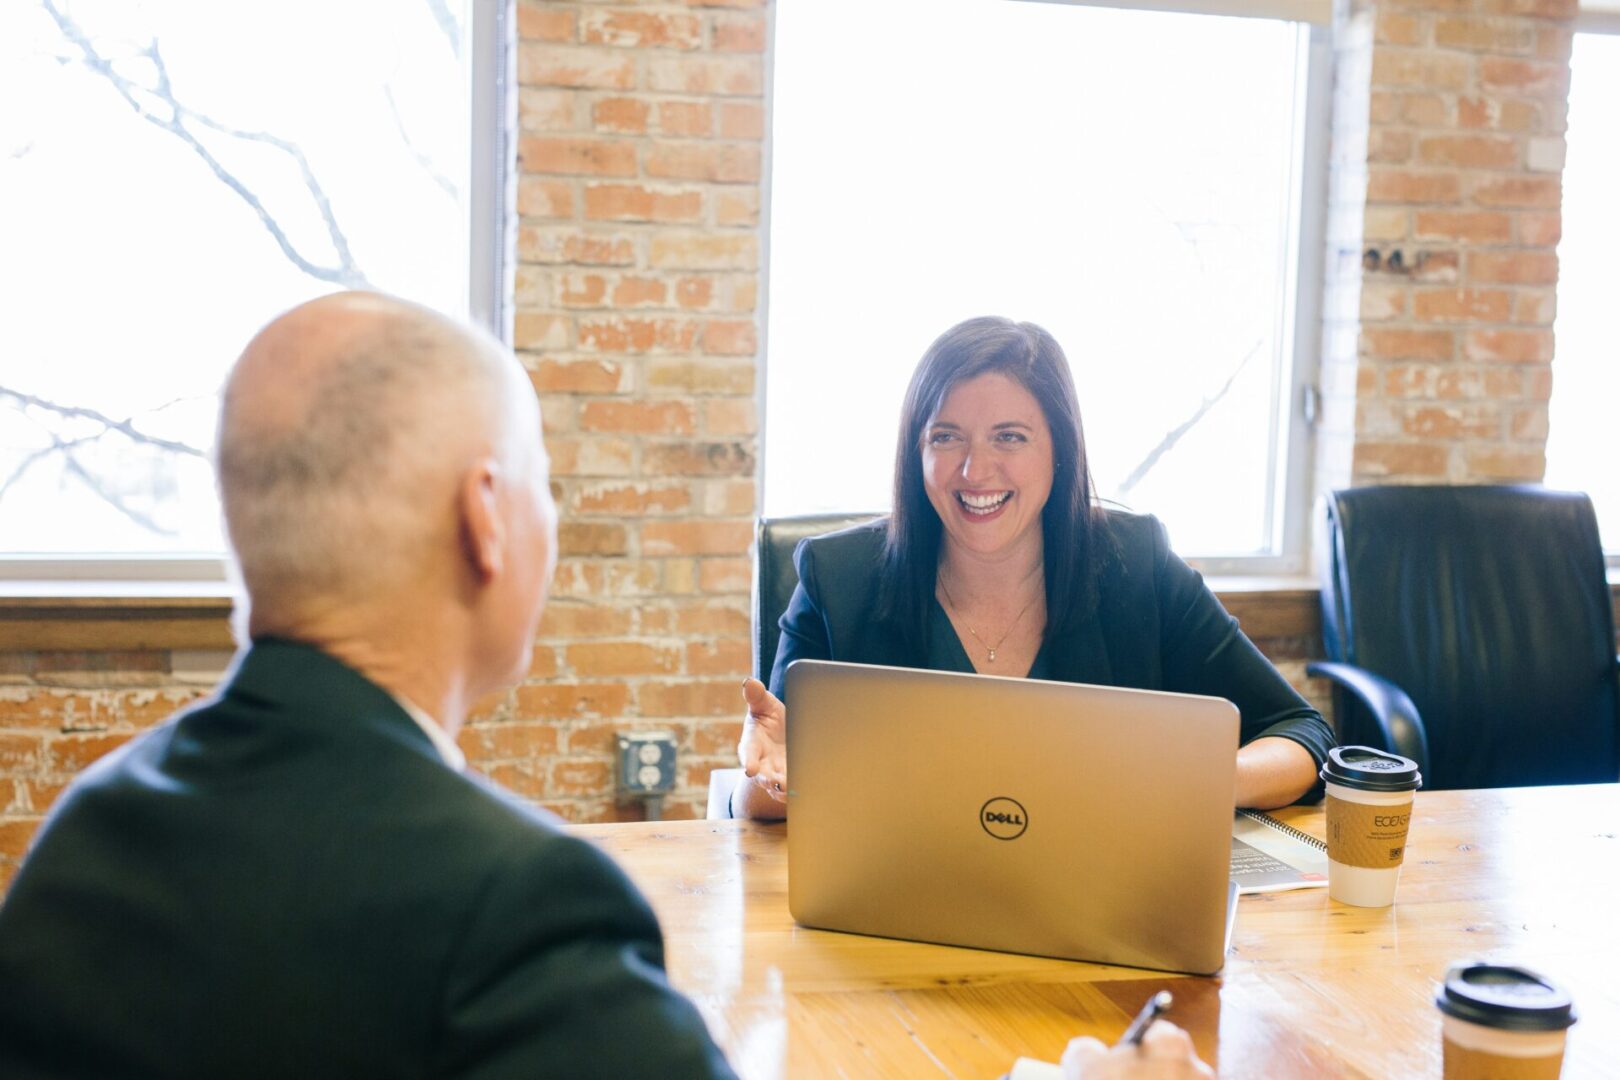 Businesswoman smiling at colleague with laptop.